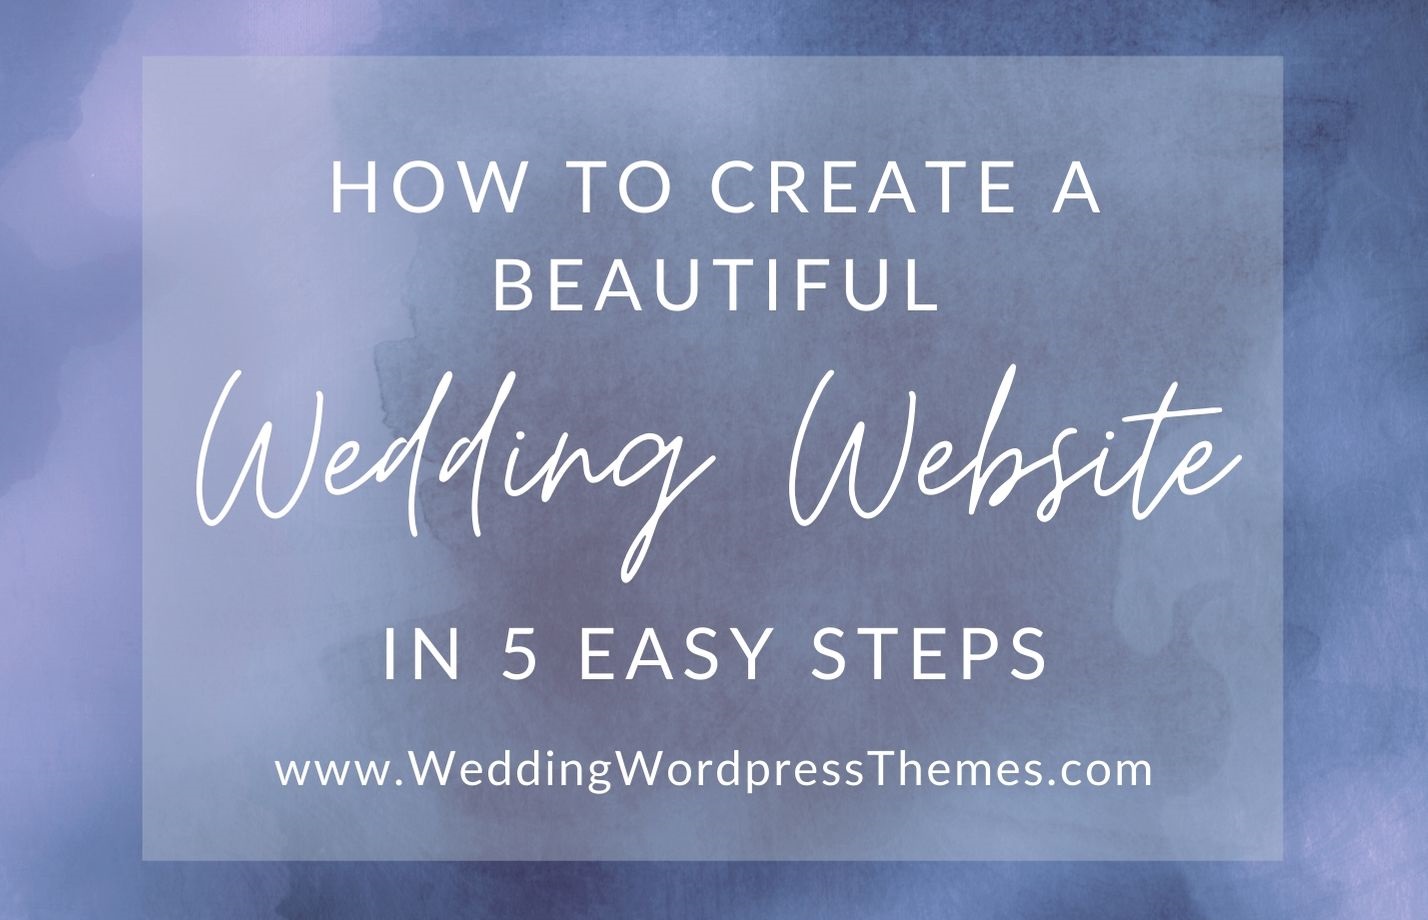 How to Create a Wedding Website in 5 Easy Steps